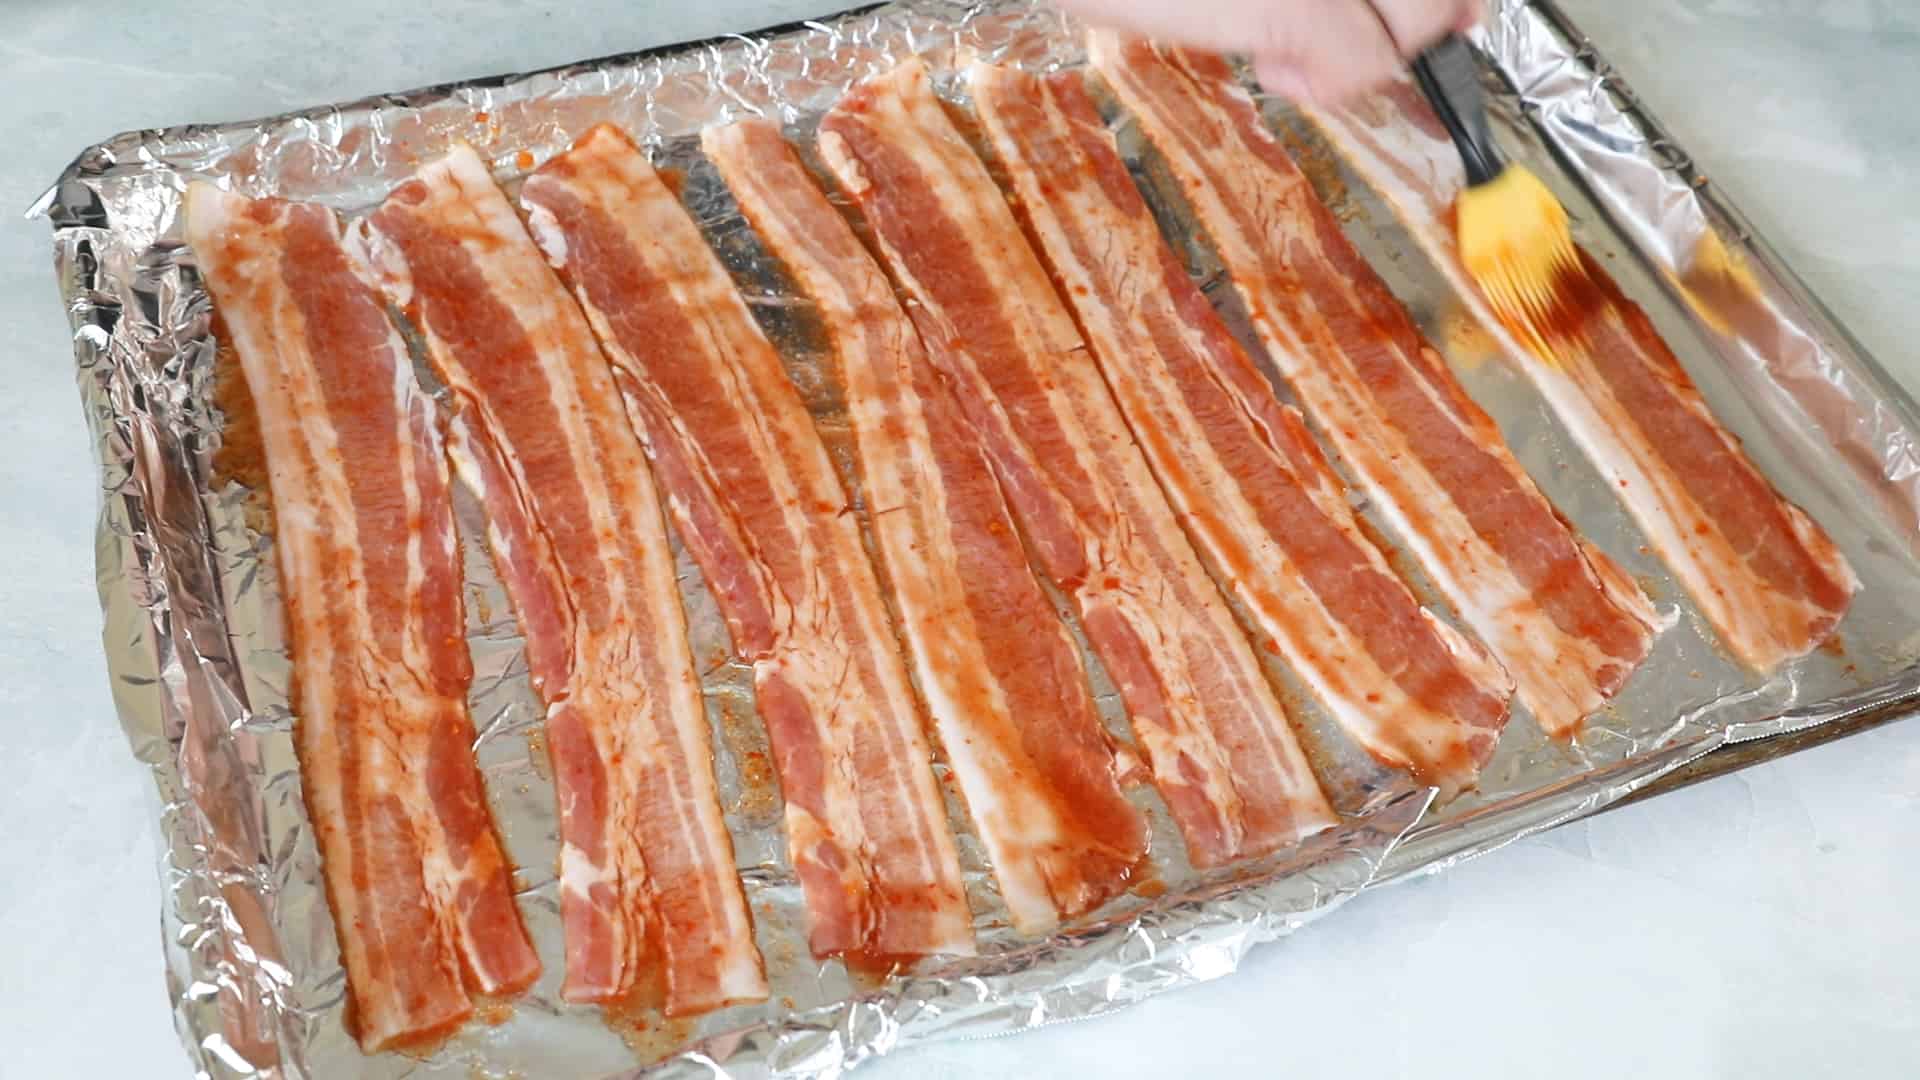 Rub down the bacon with your spicy ghost pepper mixture